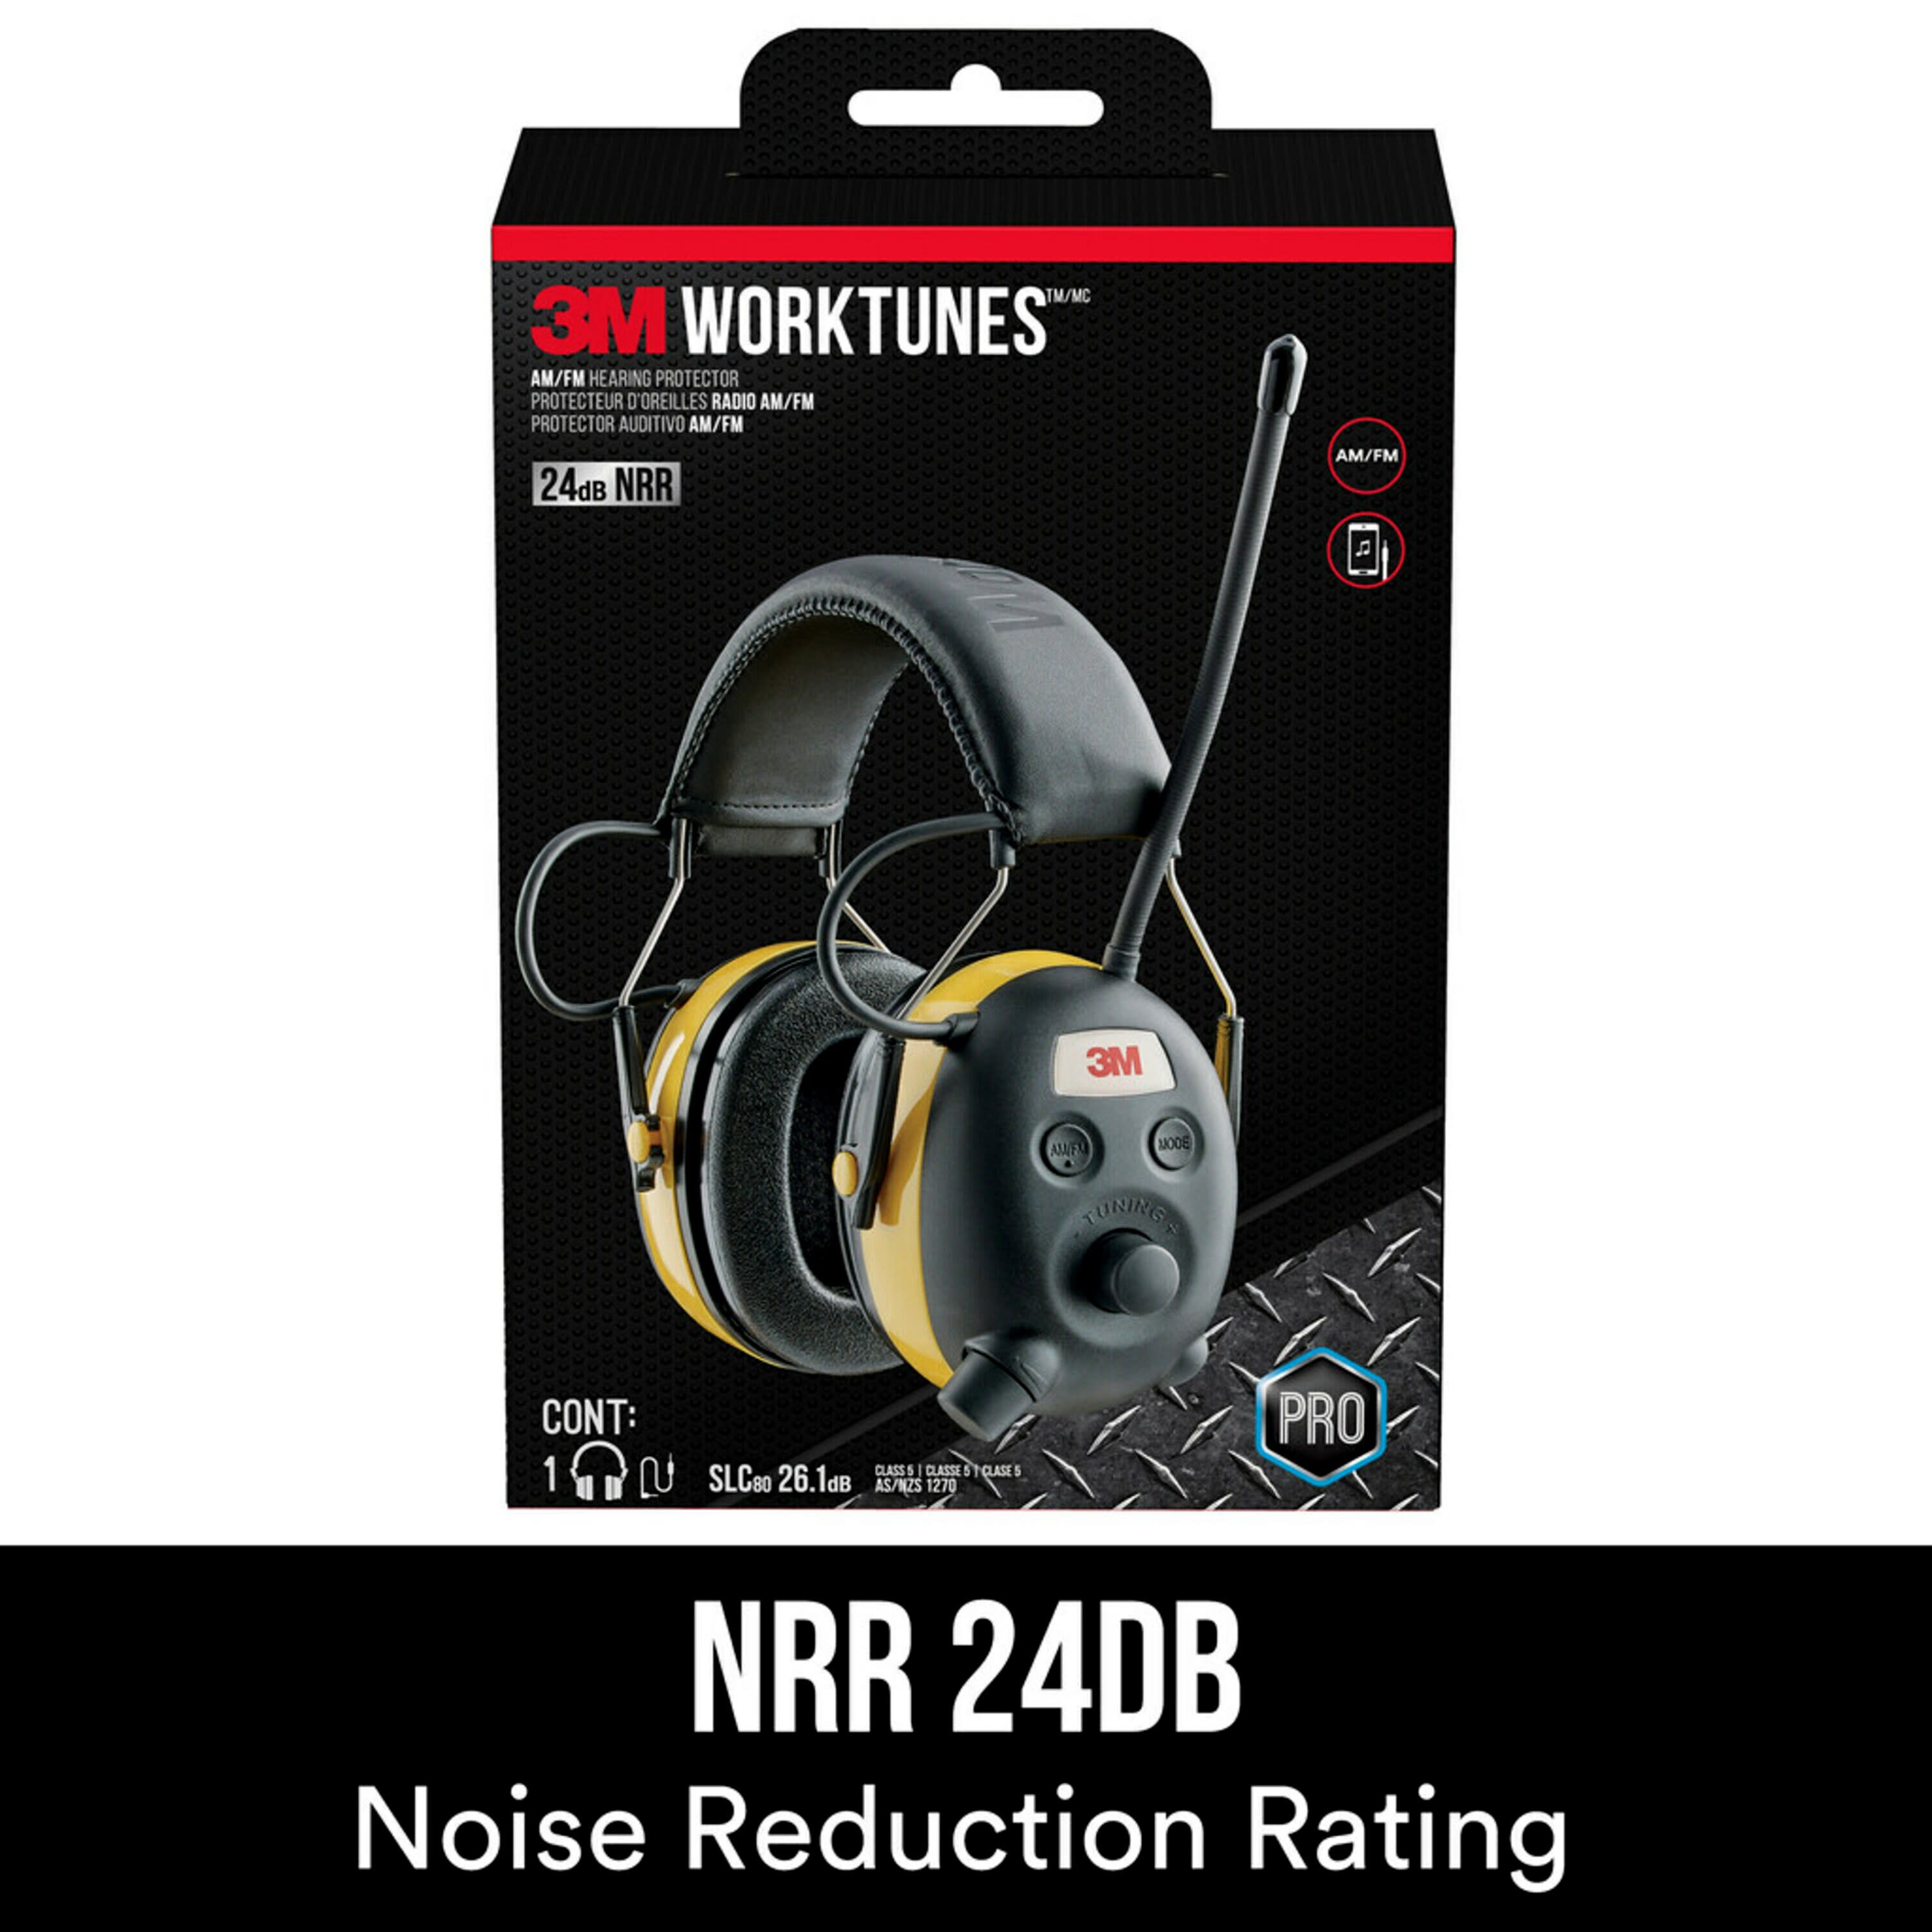 3M WorkTunes Hearing Protector with AM/FM Digital Radio - image 3 of 18